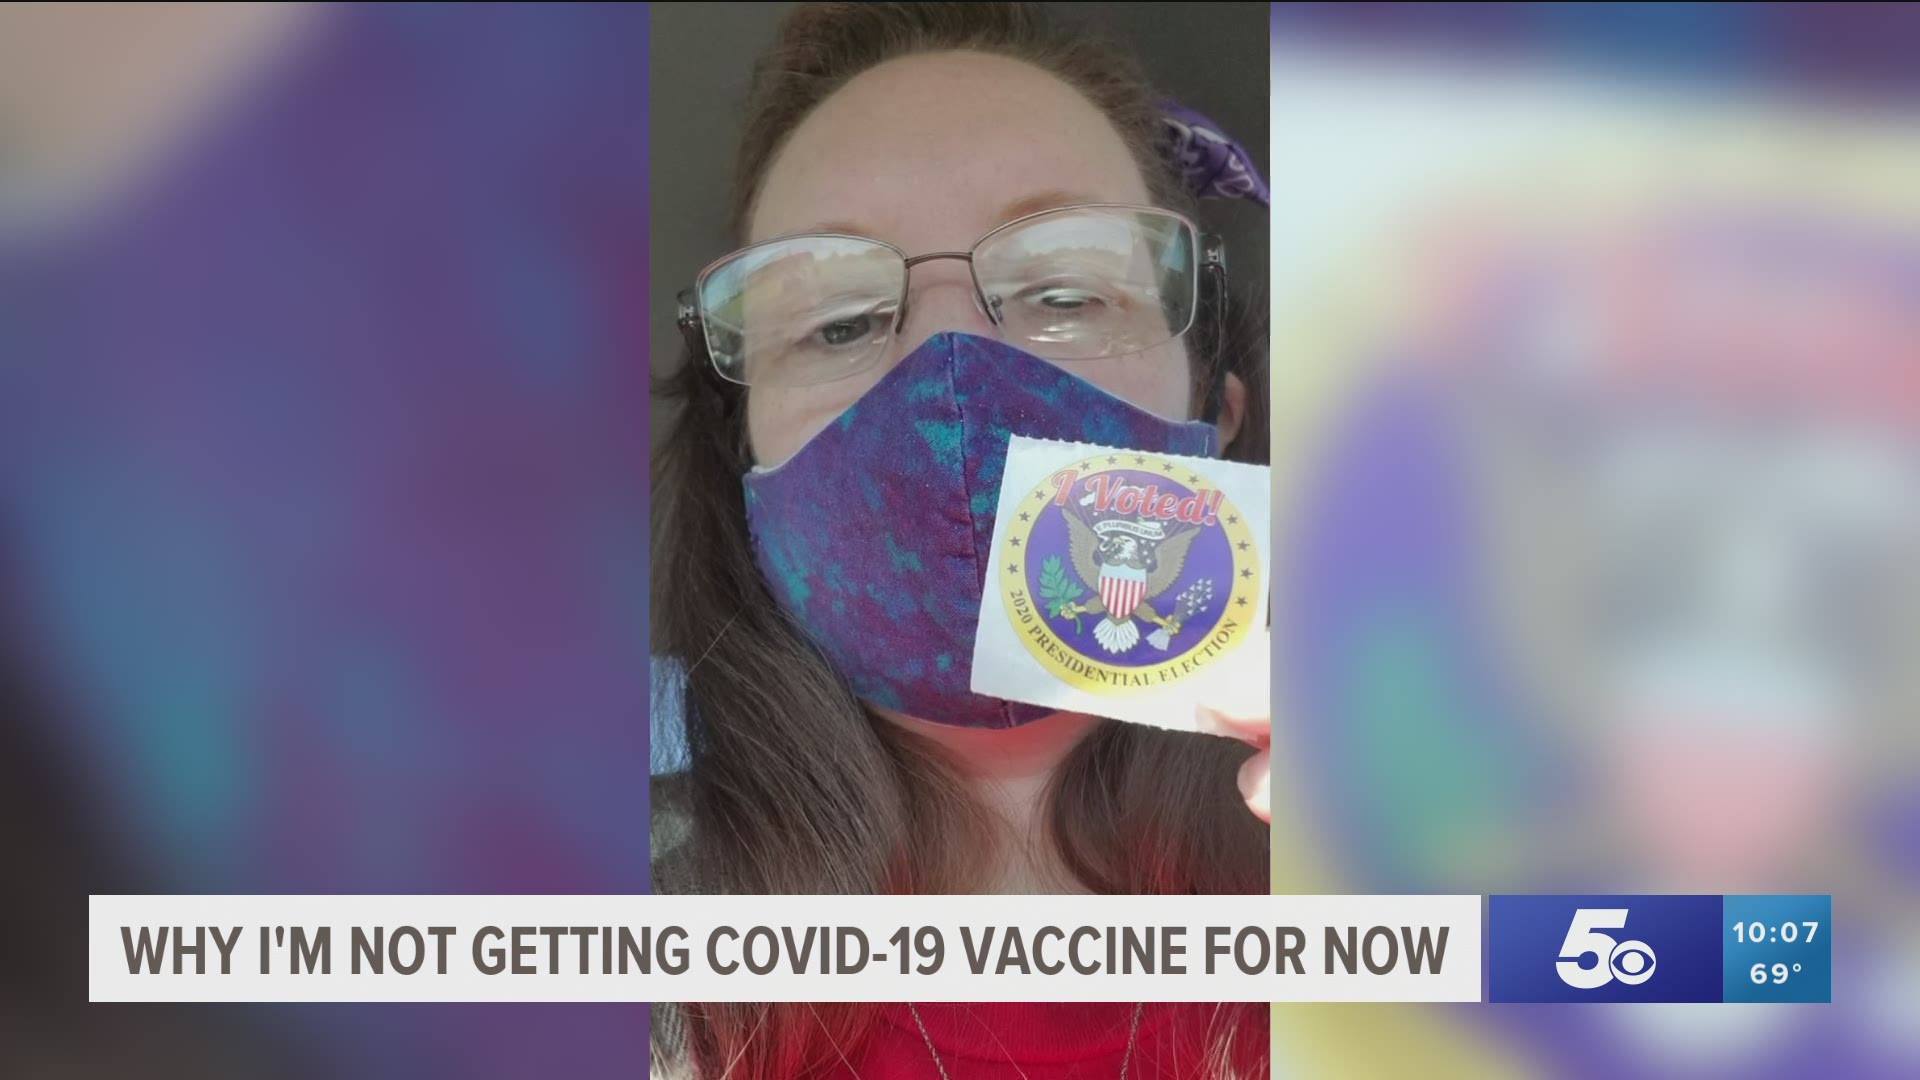 Rebecca Rowe discusses her decision to not get a COVID-19 vaccine because they are currently only authorized for emergency use, not fully FDA-approved.